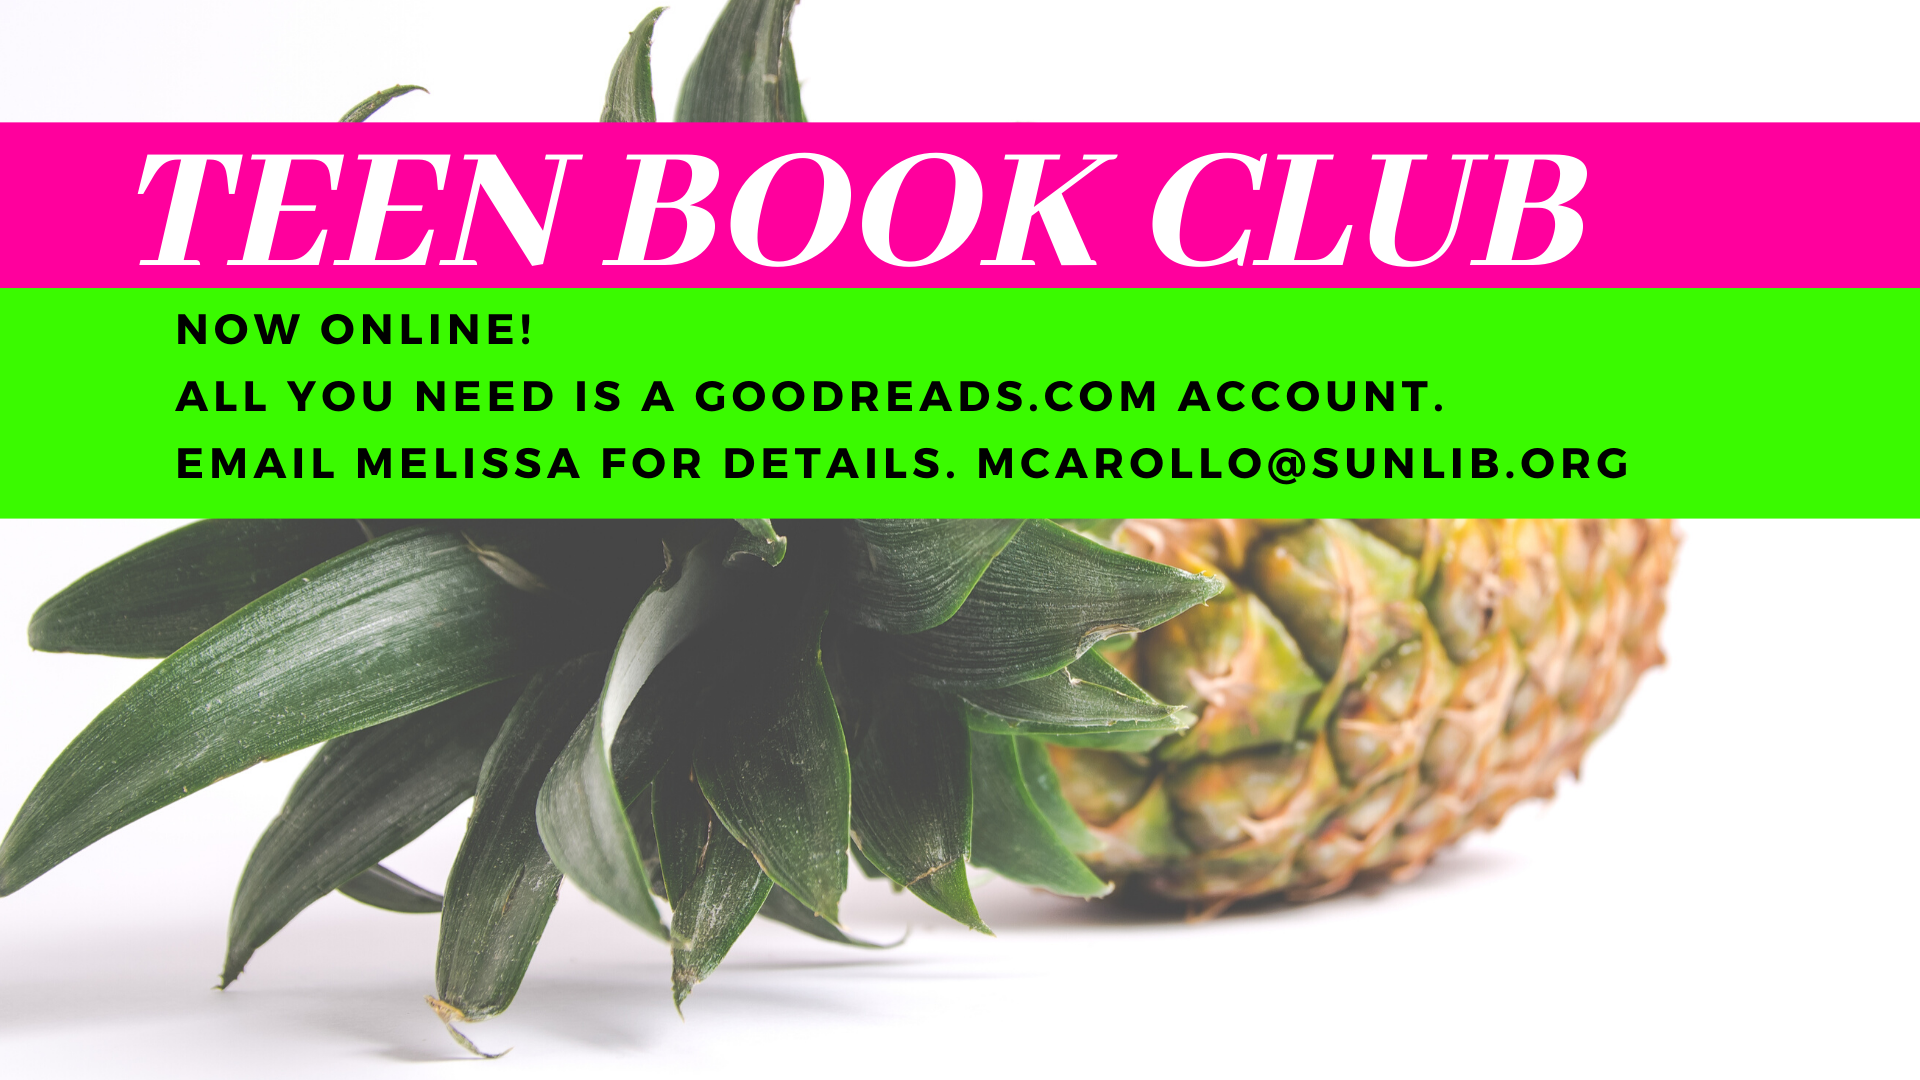 teen book club poster featuring a pineapple